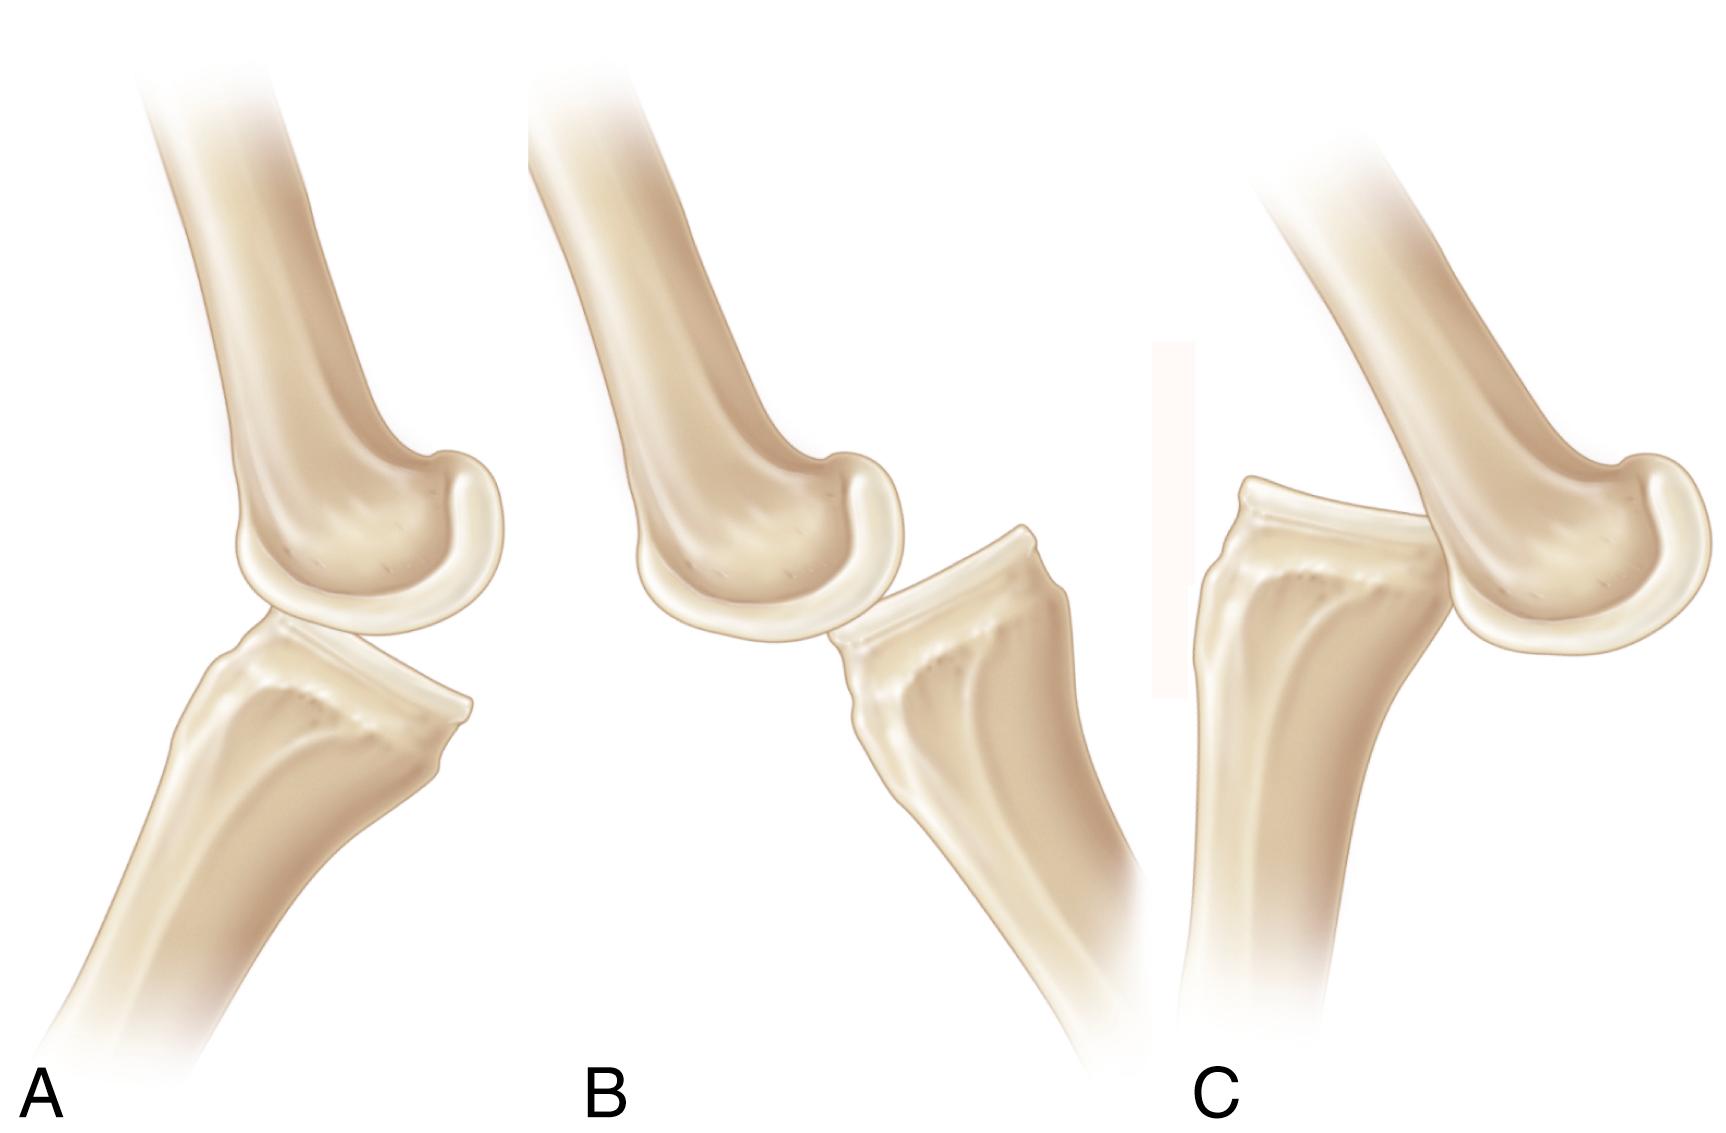 FIG. 18.2, (A) Congenital hyperextension of the knee. (B) Congenital subluxation of the knee. (C) Congenital dislocation of the knee.